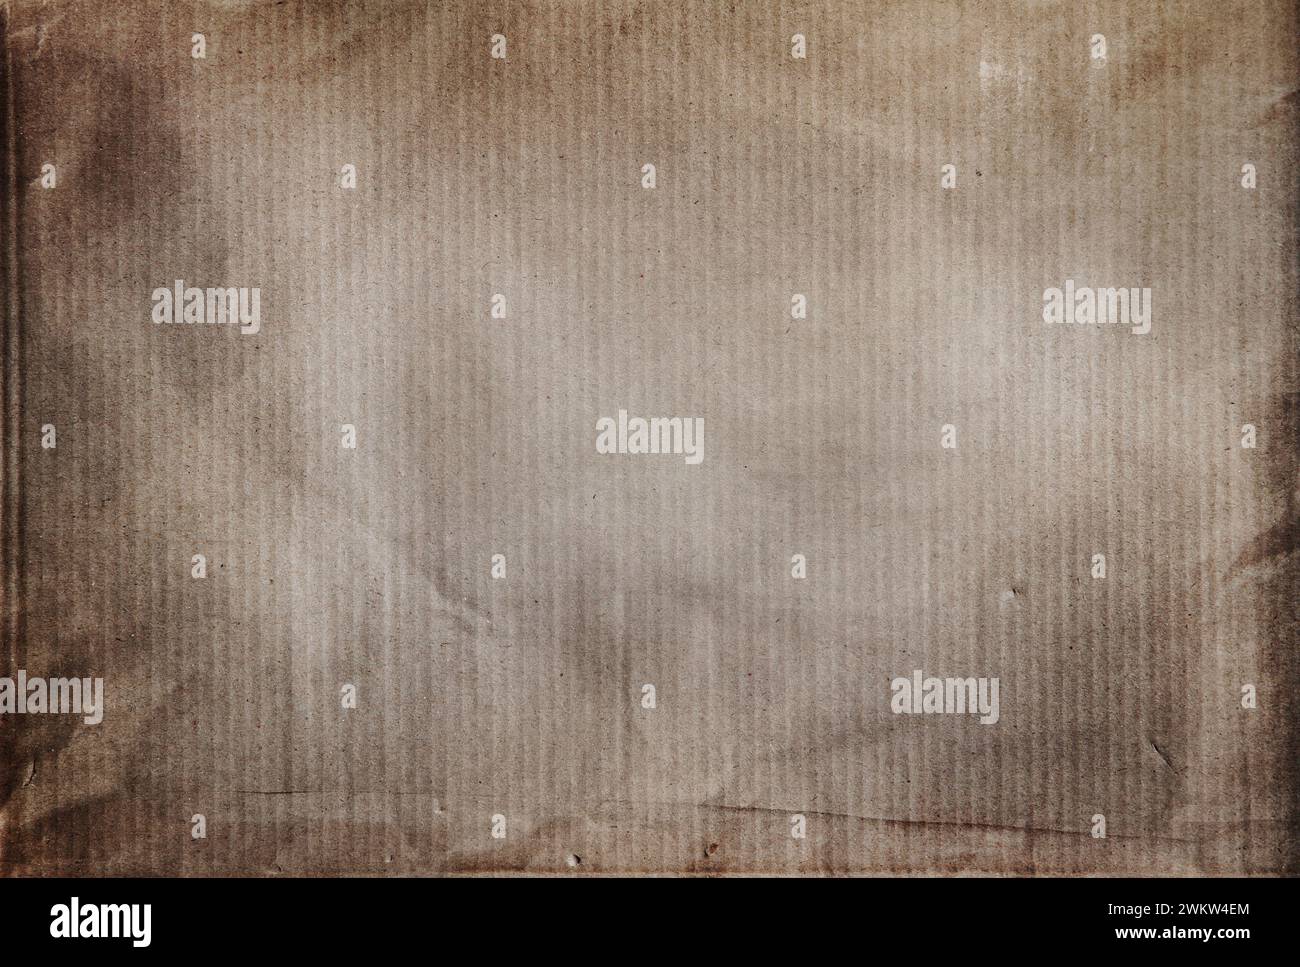 Closeup of grunge brown paper texture background Stock Photo